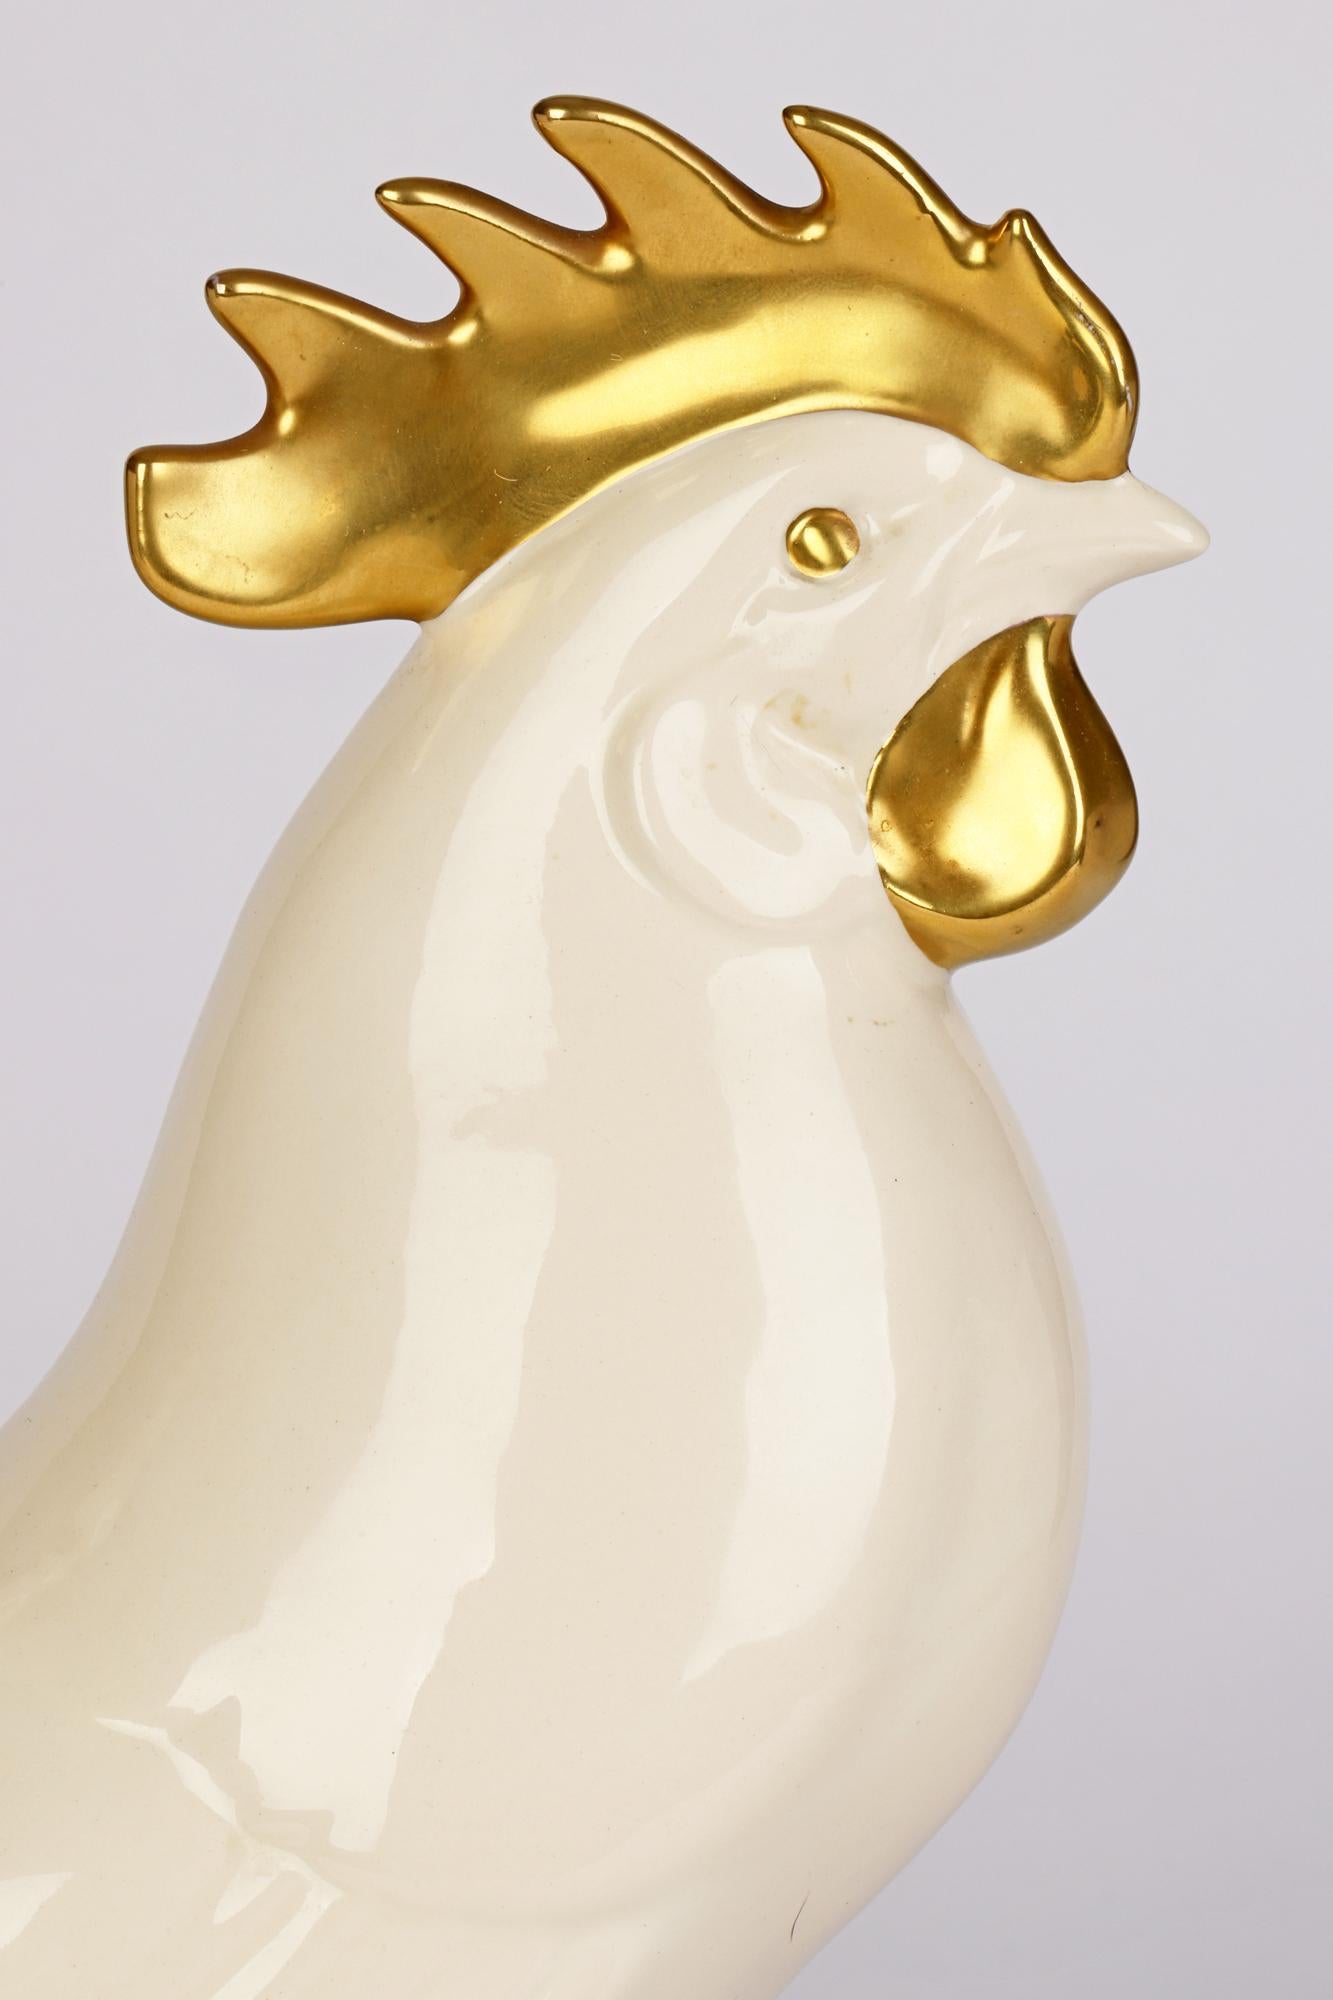 A fine German large ceramic cockerel figure dating from around 1970. The cockerel stands on a round pedestal base with incised and molded detailing with raised tail feathers and large raised comb. The cockerel is decorated in natural glazed cream